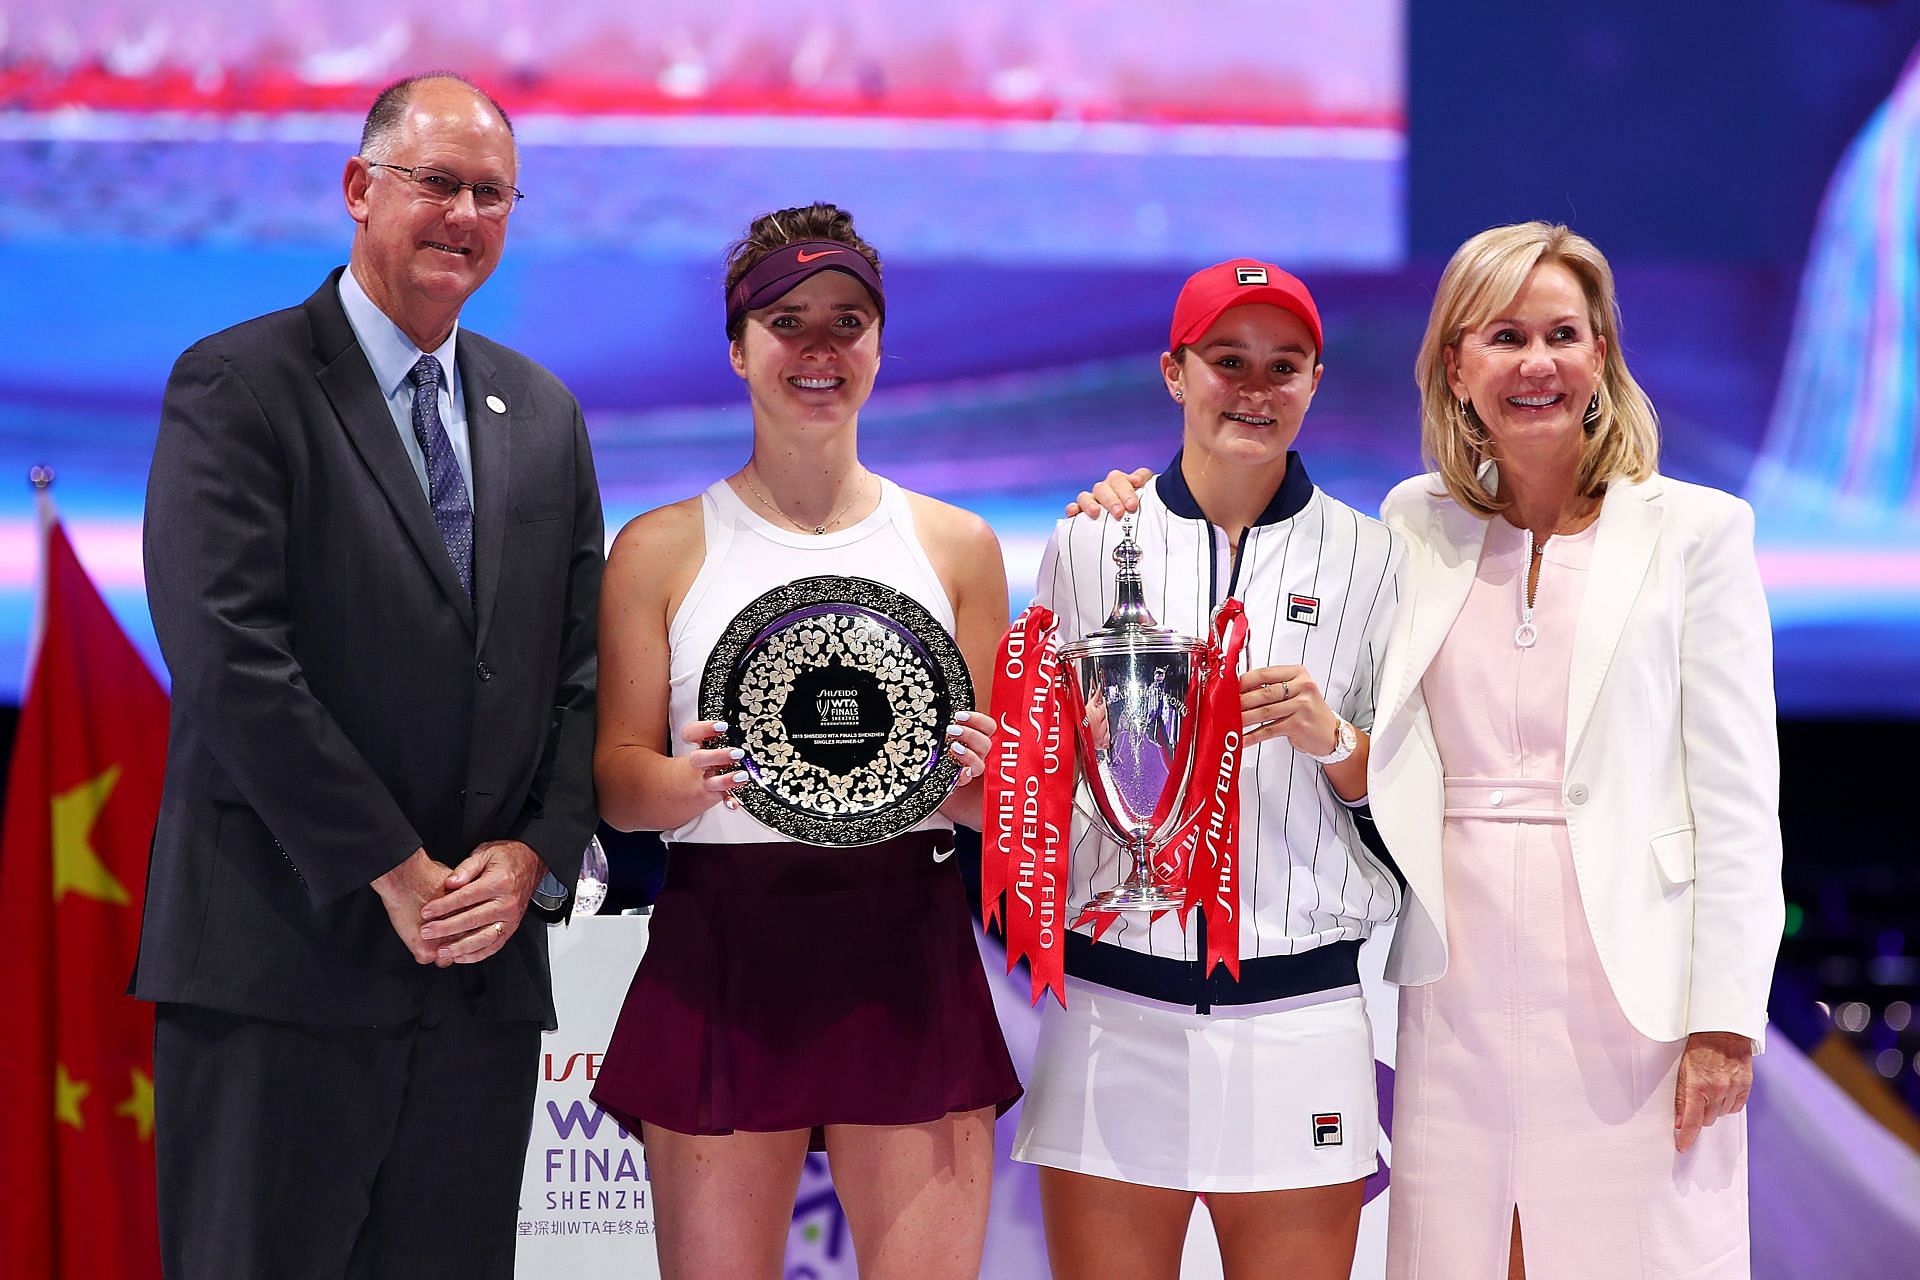 Steve Simon (first from left) in Shenzhen for the 2019 WTA Finals.